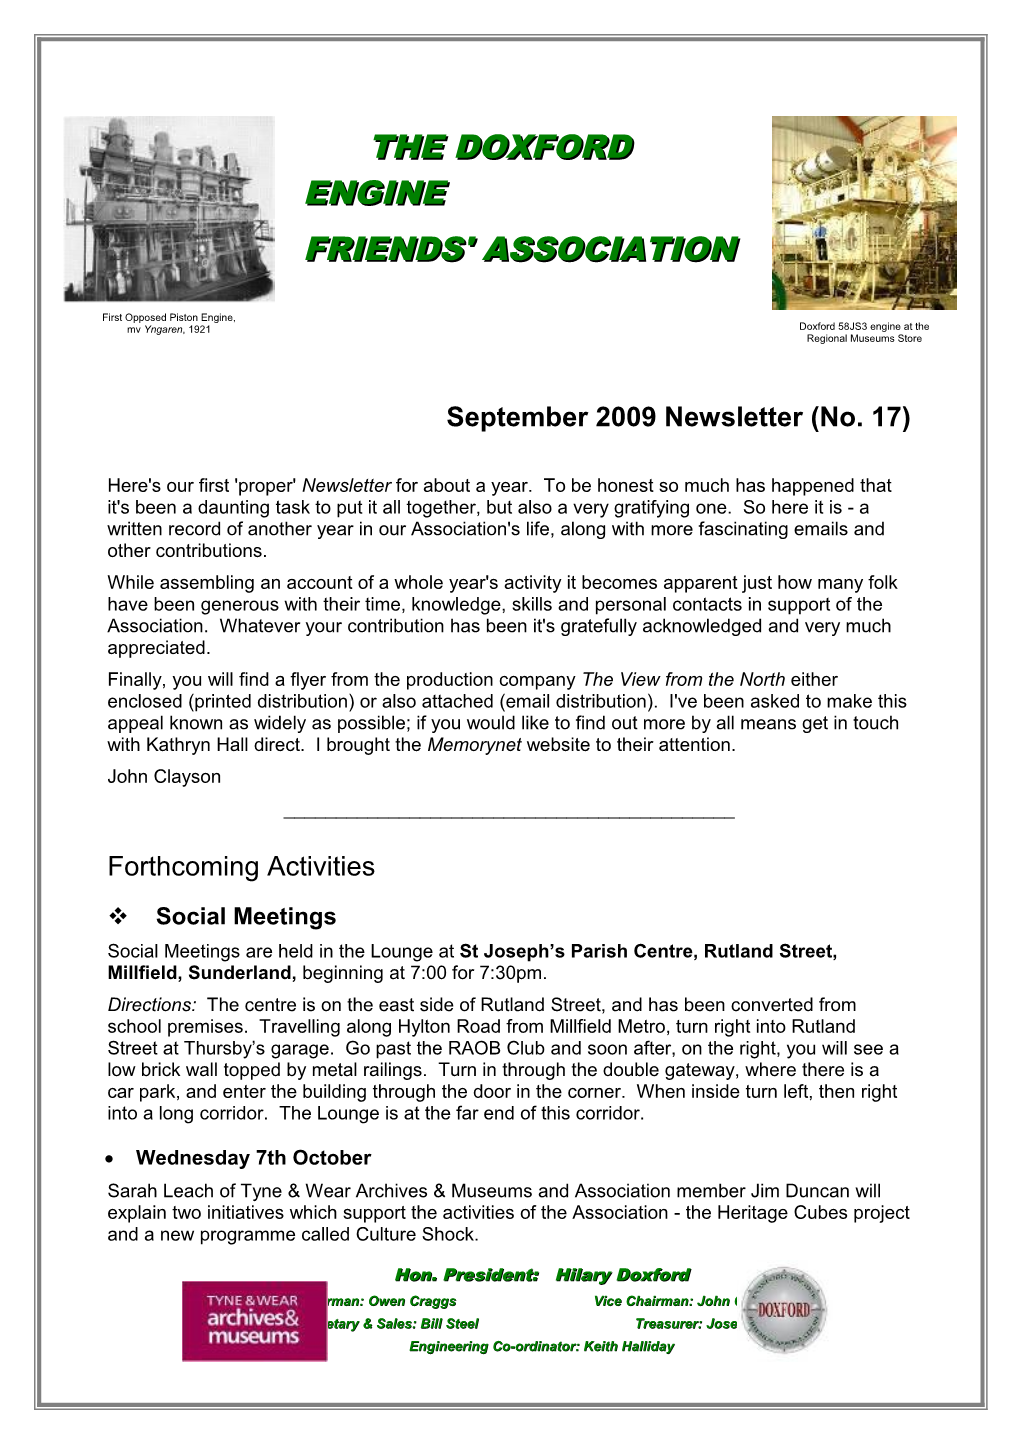 The Doxford Engine Friends Association